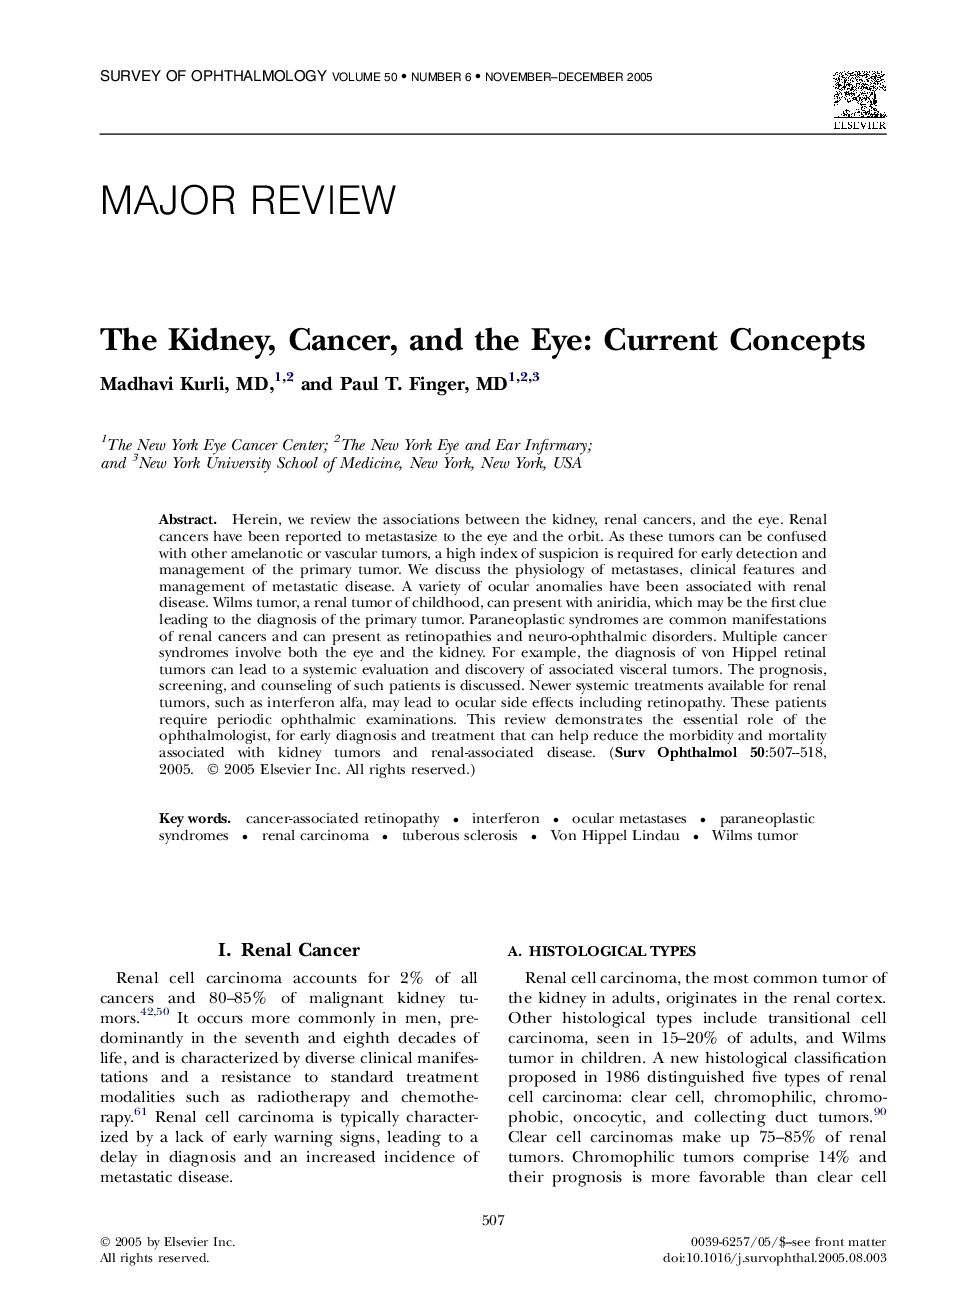 The Kidney, Cancer, and the Eye: Current Concepts